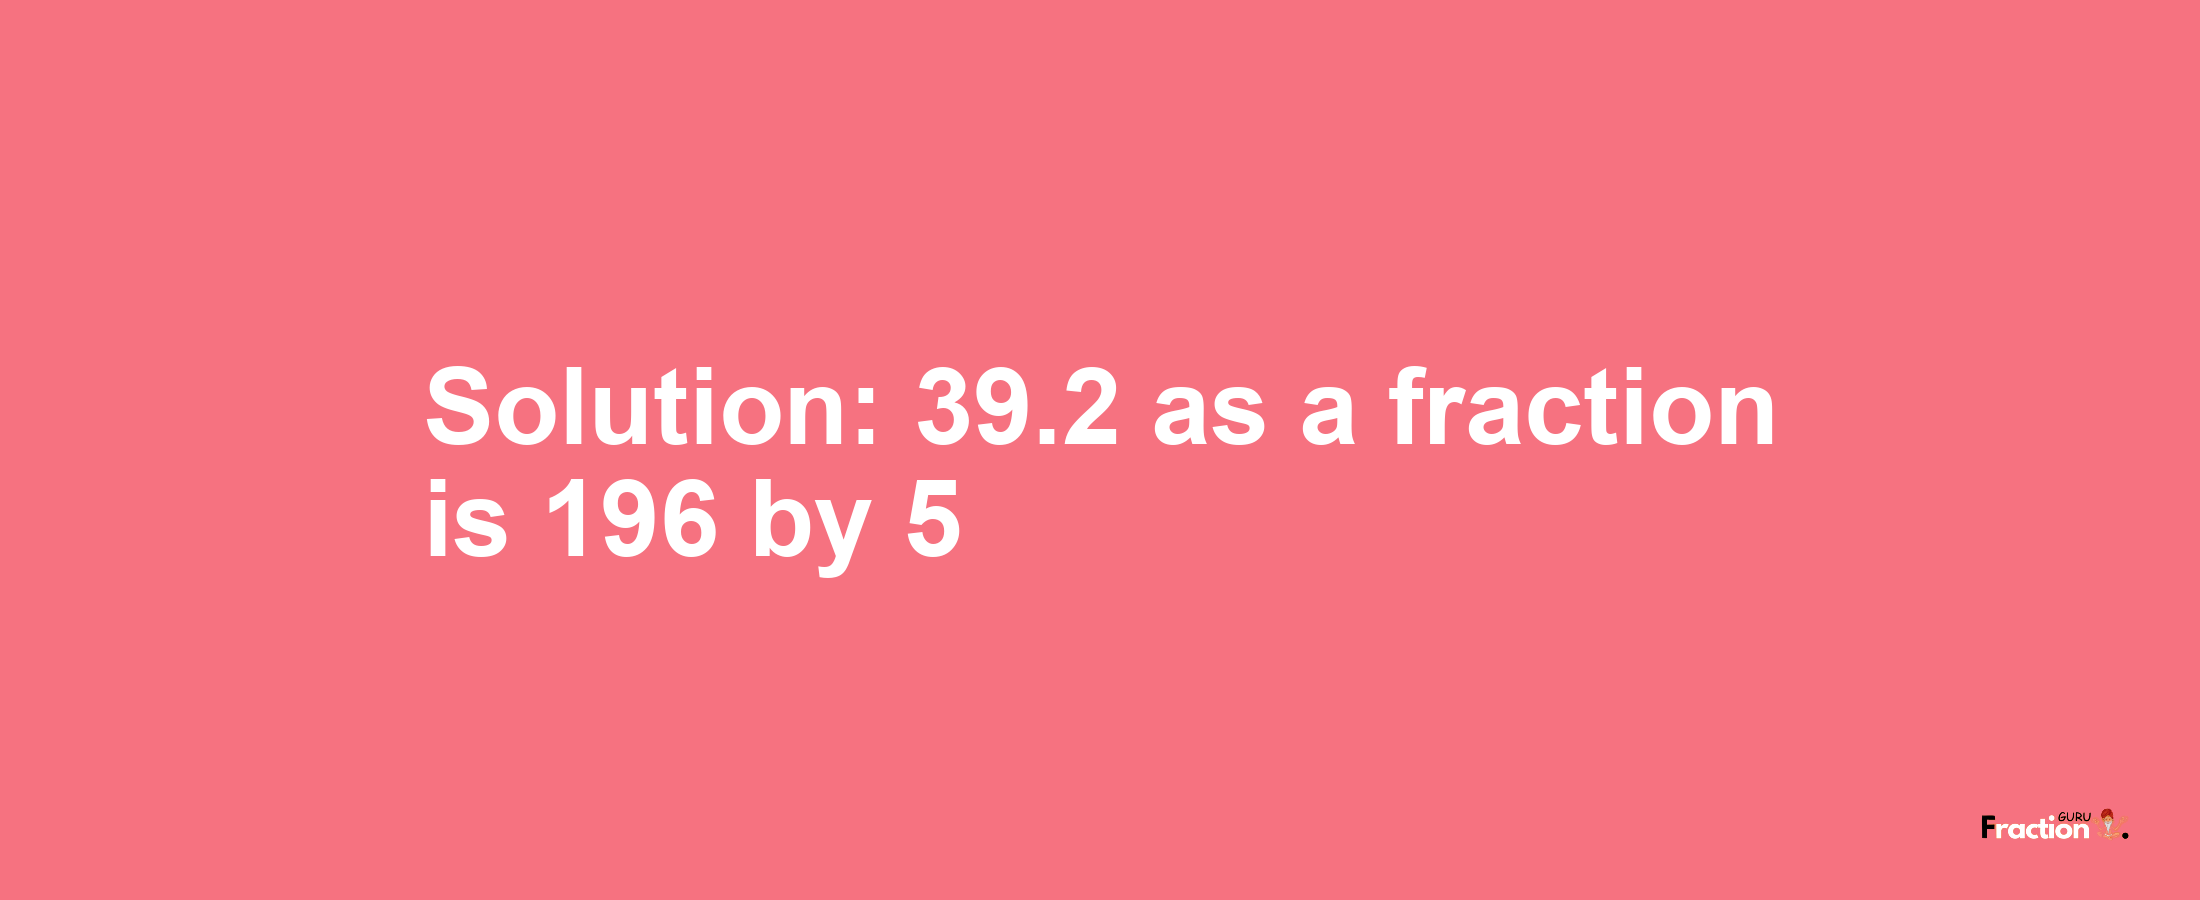 Solution:39.2 as a fraction is 196/5